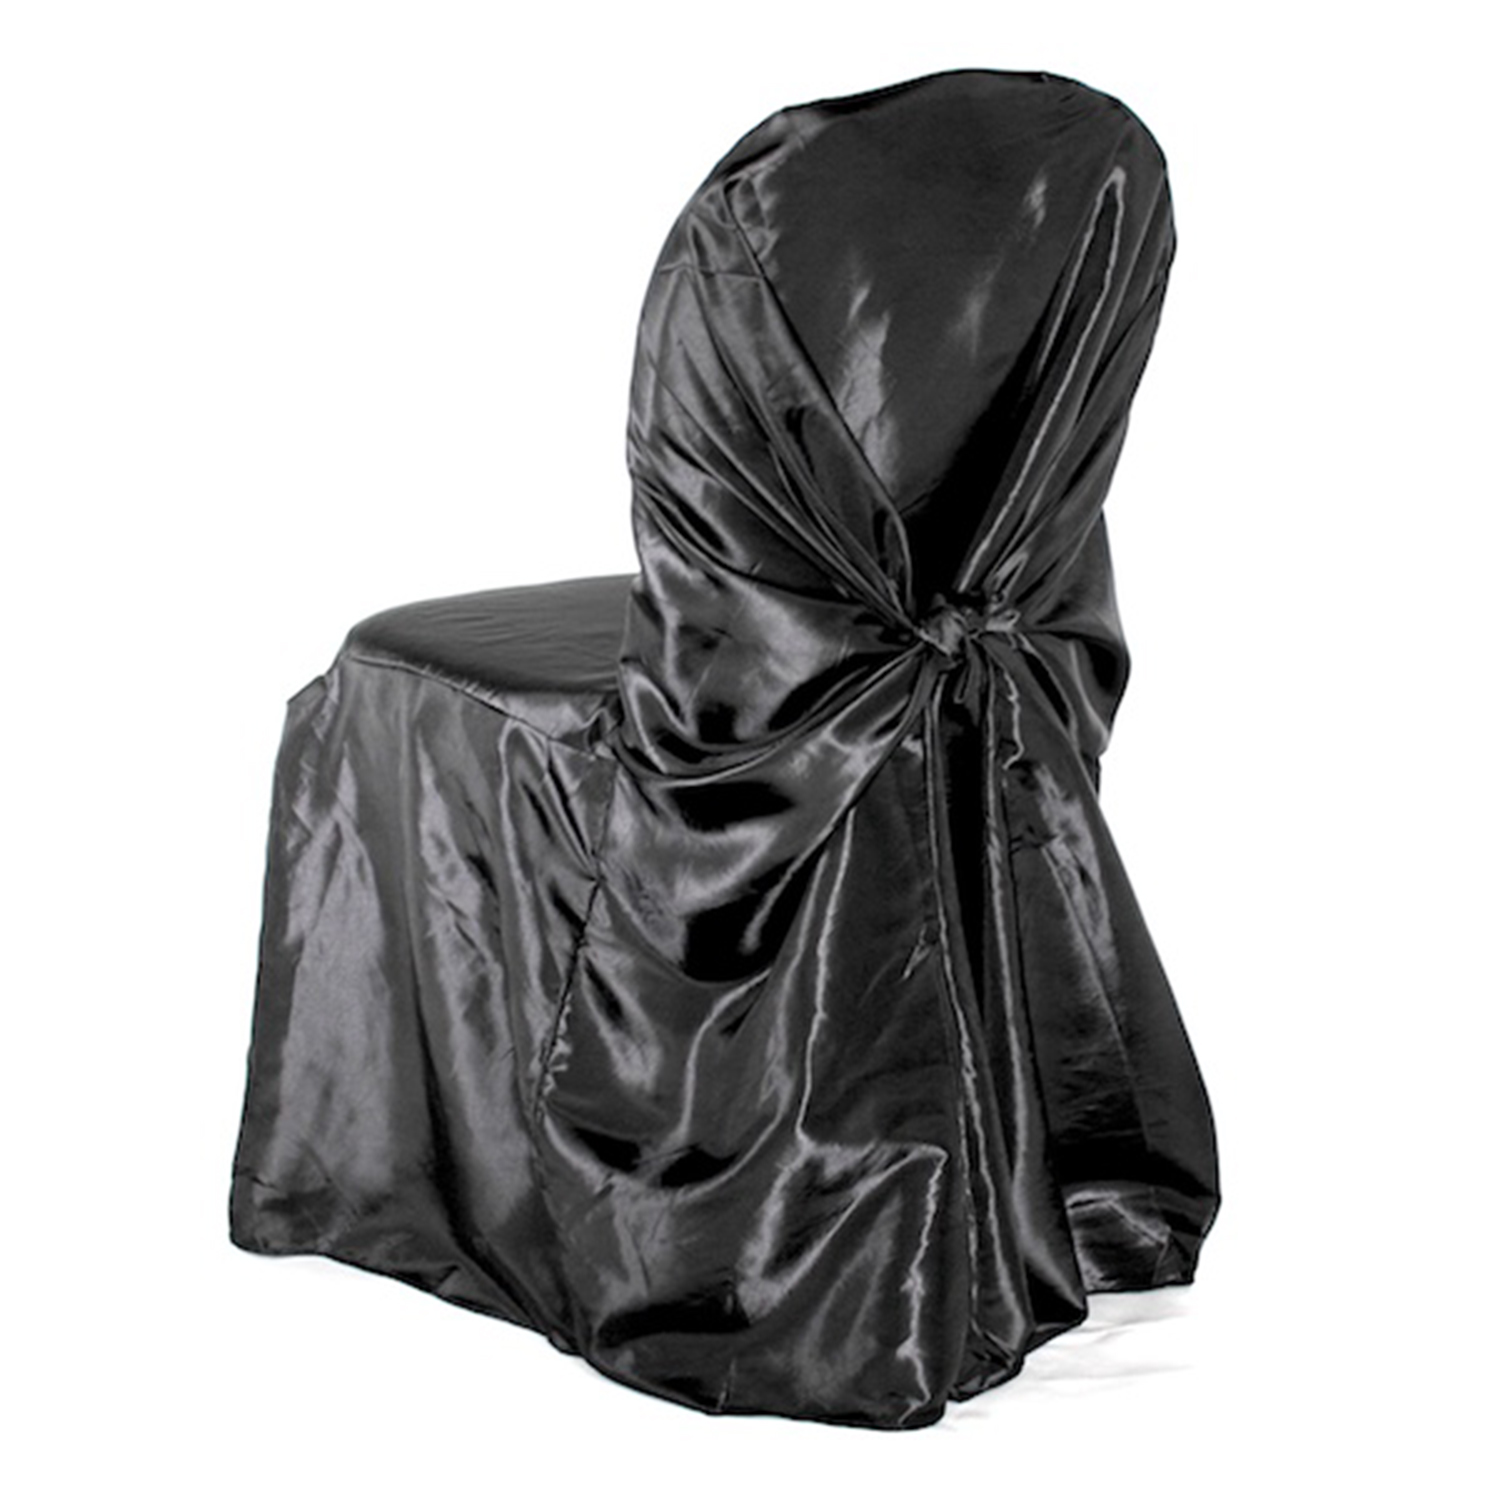 Black Wedding Chair Covers Seat Covers For Weddings